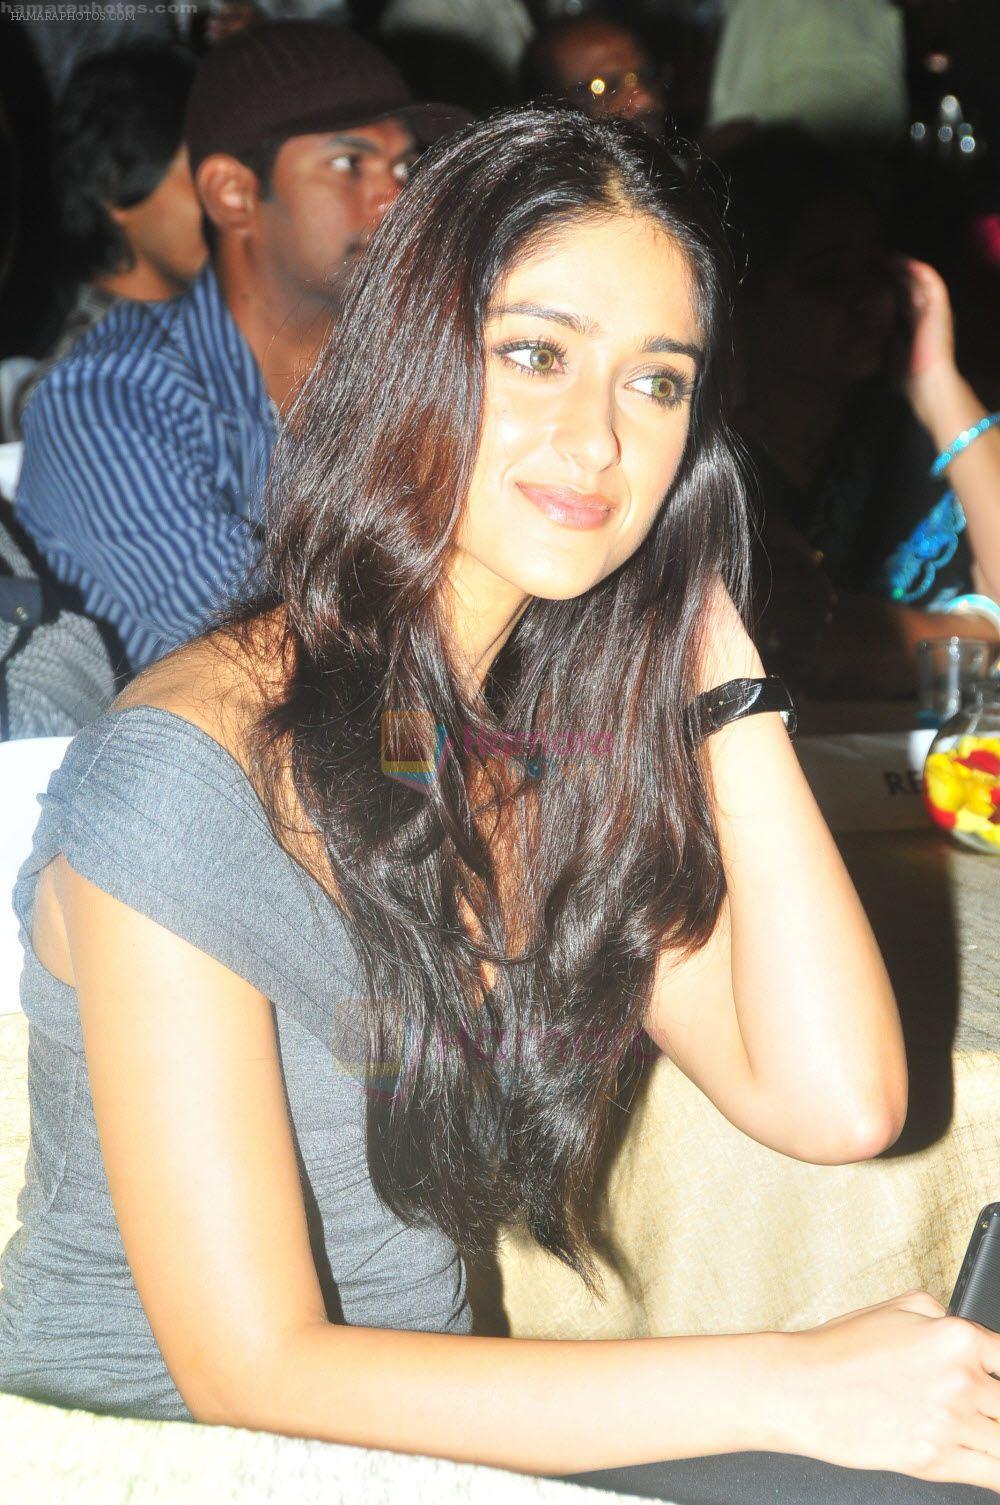 Illeana DCruz at the Tollywood Book Launch on August 26 2011